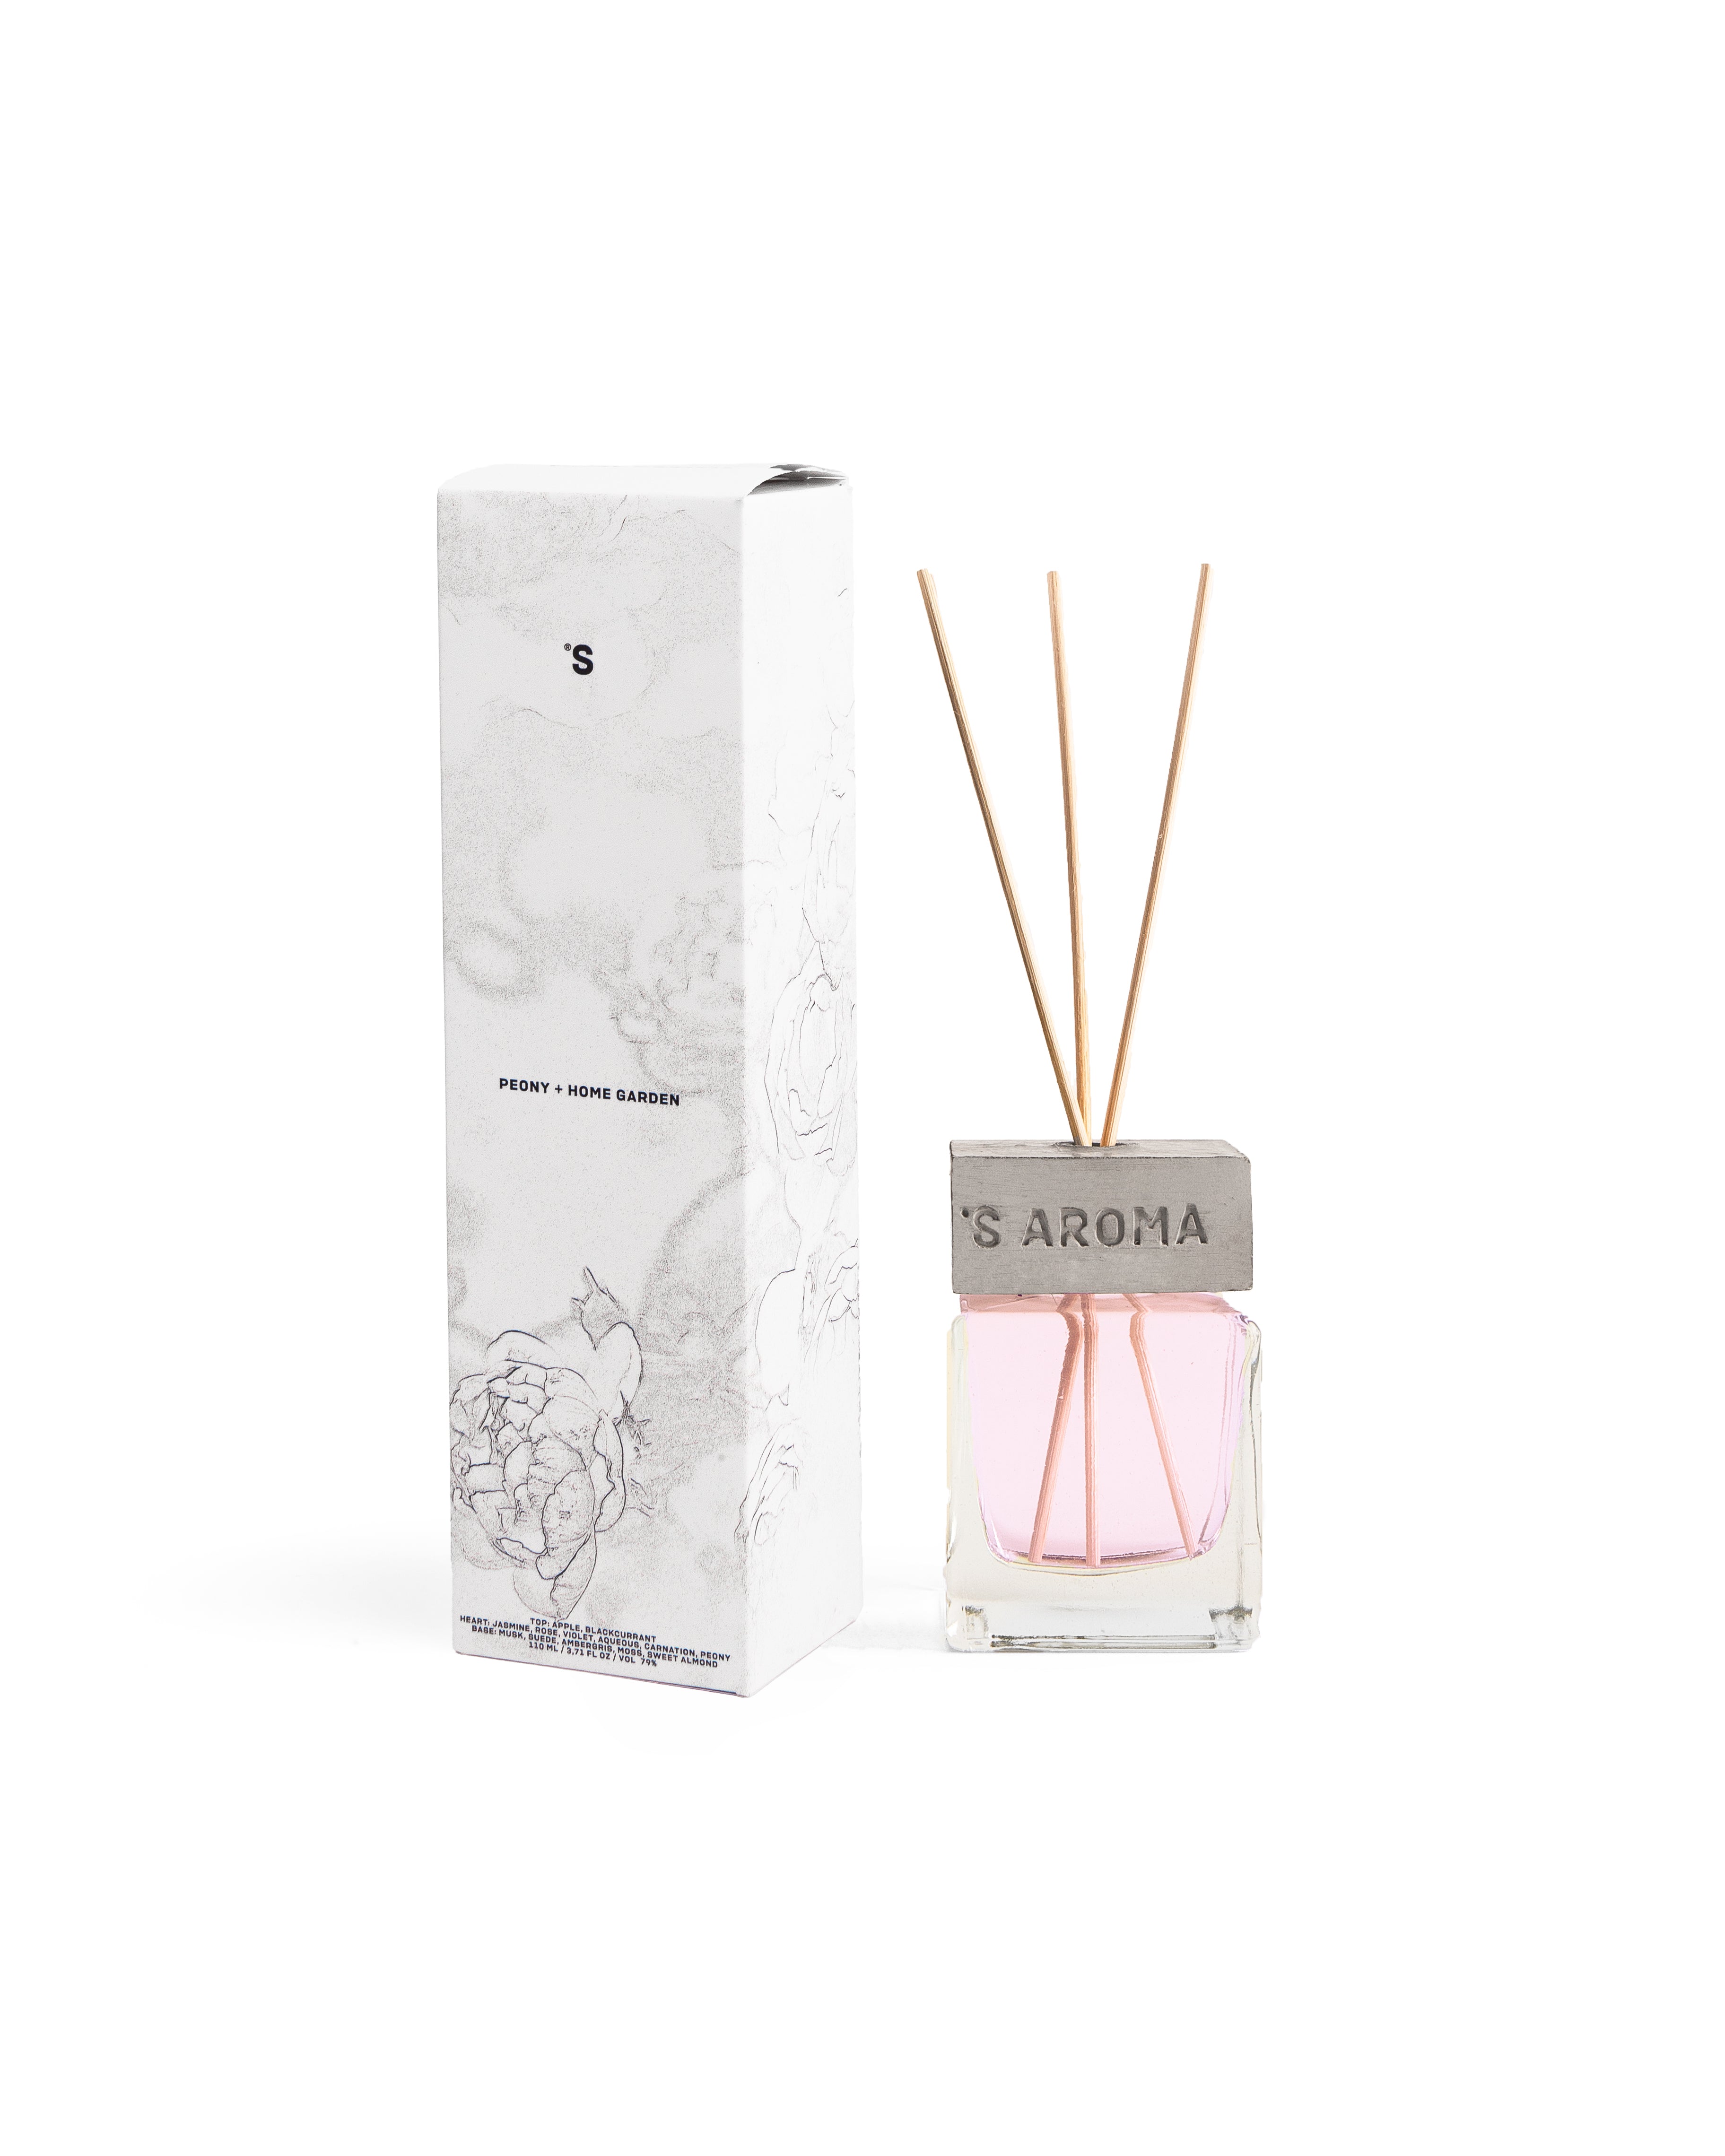 Sisters Aroma - Diffuser Peony Home Garden